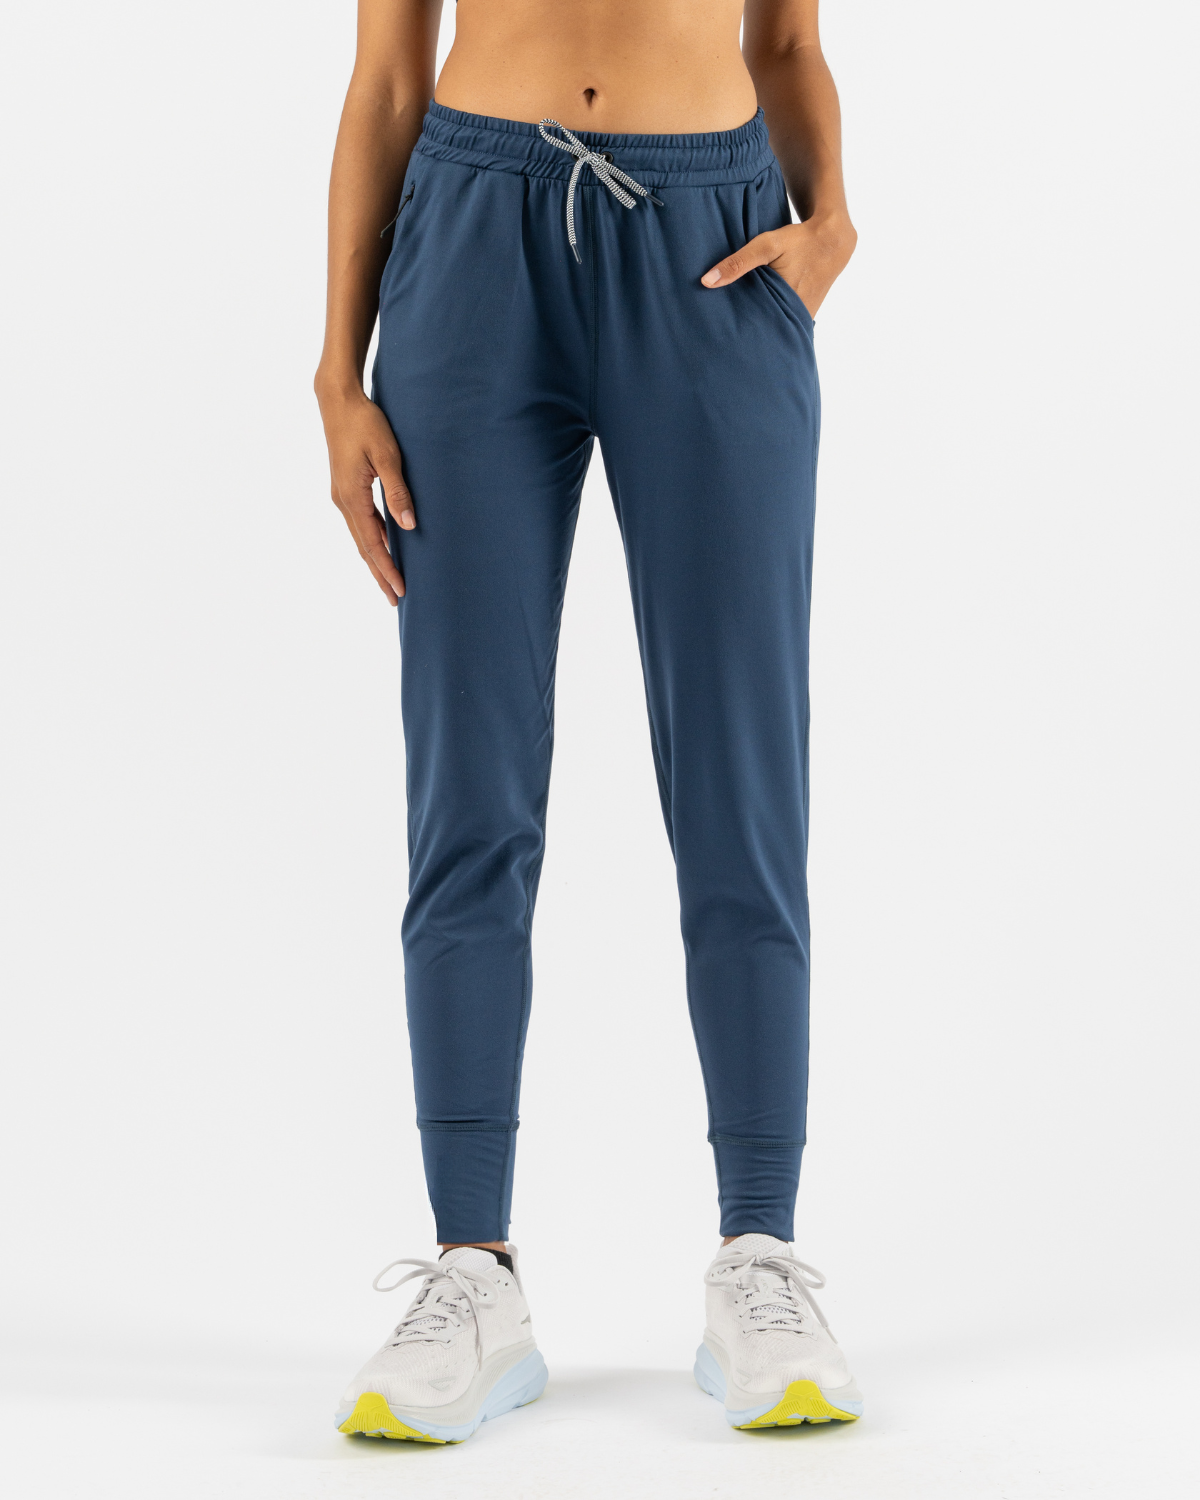 YOURS Plus Size Navy Blue Cuffed Joggers